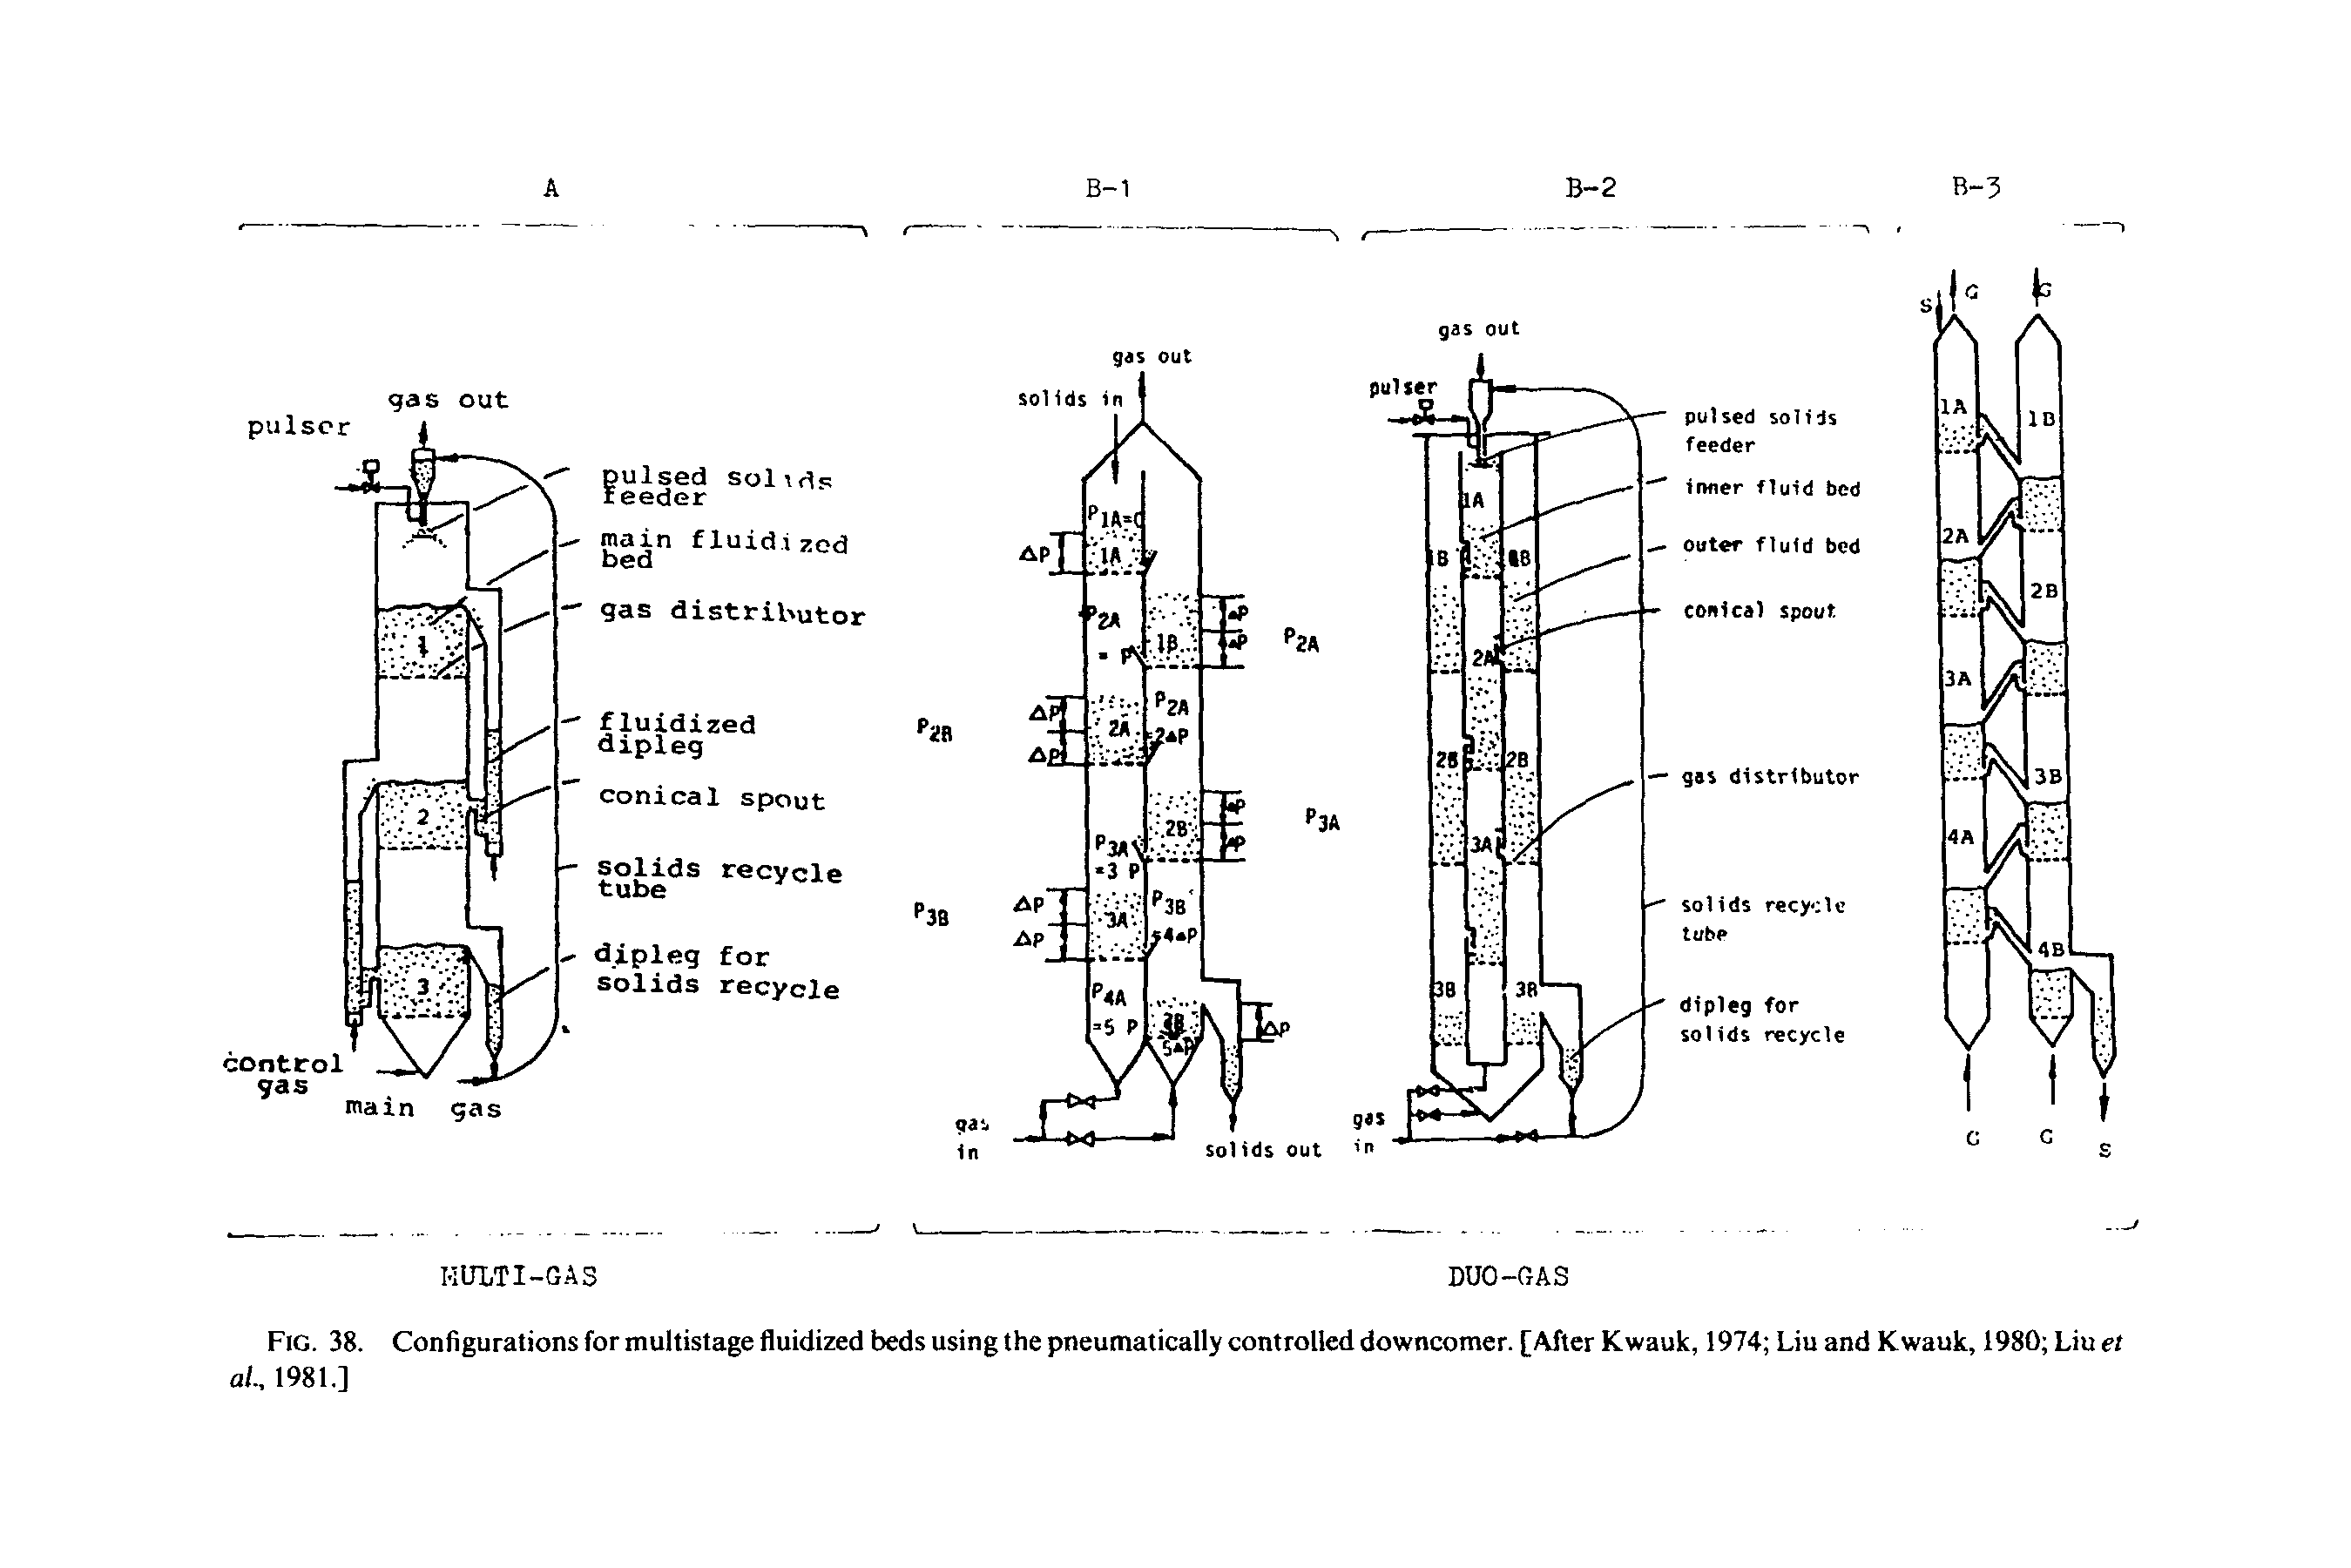 Fig. 38. Configurations for multistage fluidized beds using the pneumatically controlled downcomer. [After Kwauk, 1974 Liu and Kwauk, 1980 Liu et al., 1981.]...